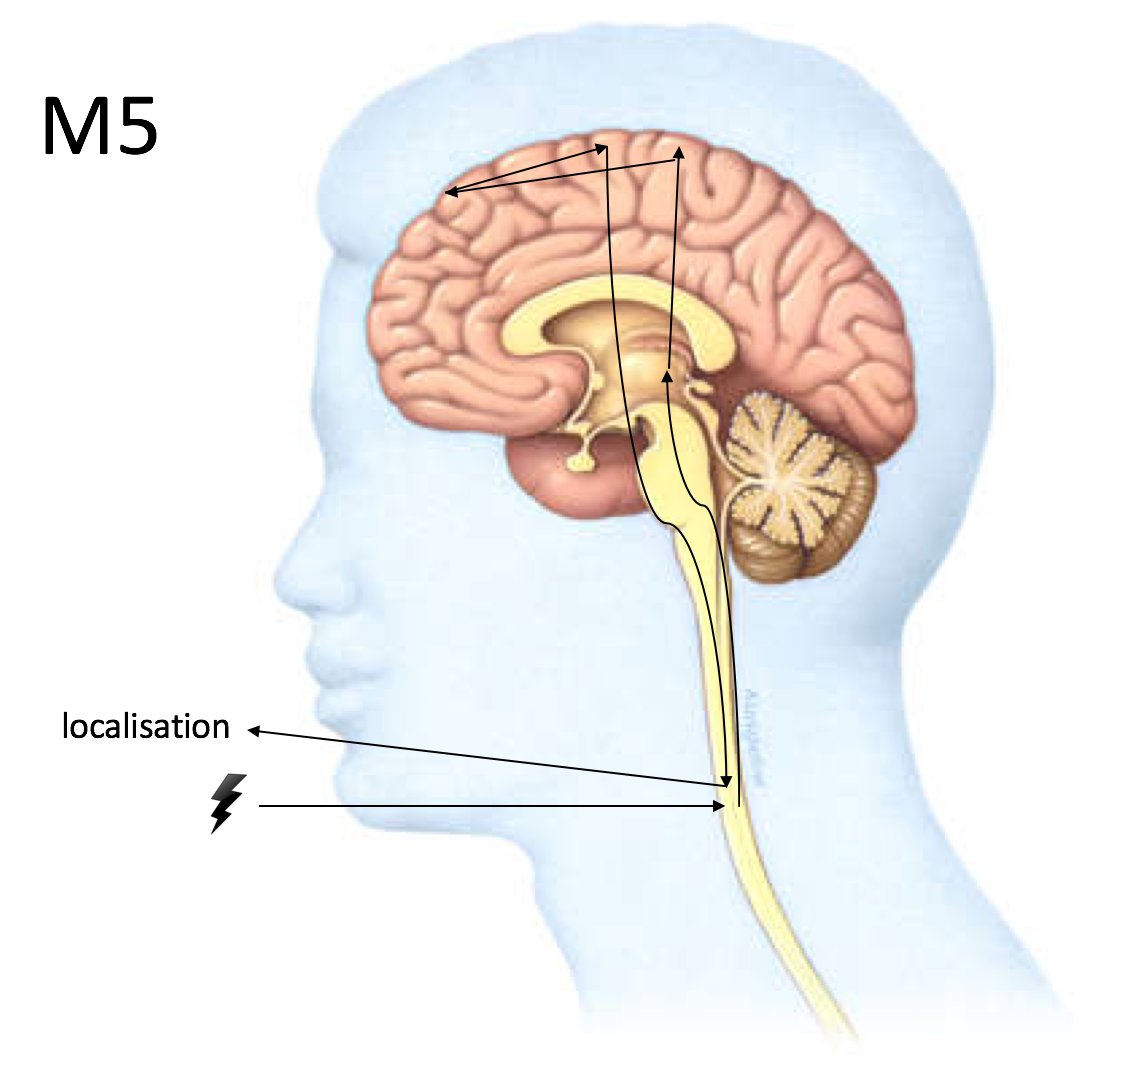 M5. An unconscious response but you can localise your hand reasonably accurately to the site of the painful stimulus. This requires polysynaptic cortical processing through motor planning areas. Most of the cortex, and everything below it, is working. 8/15